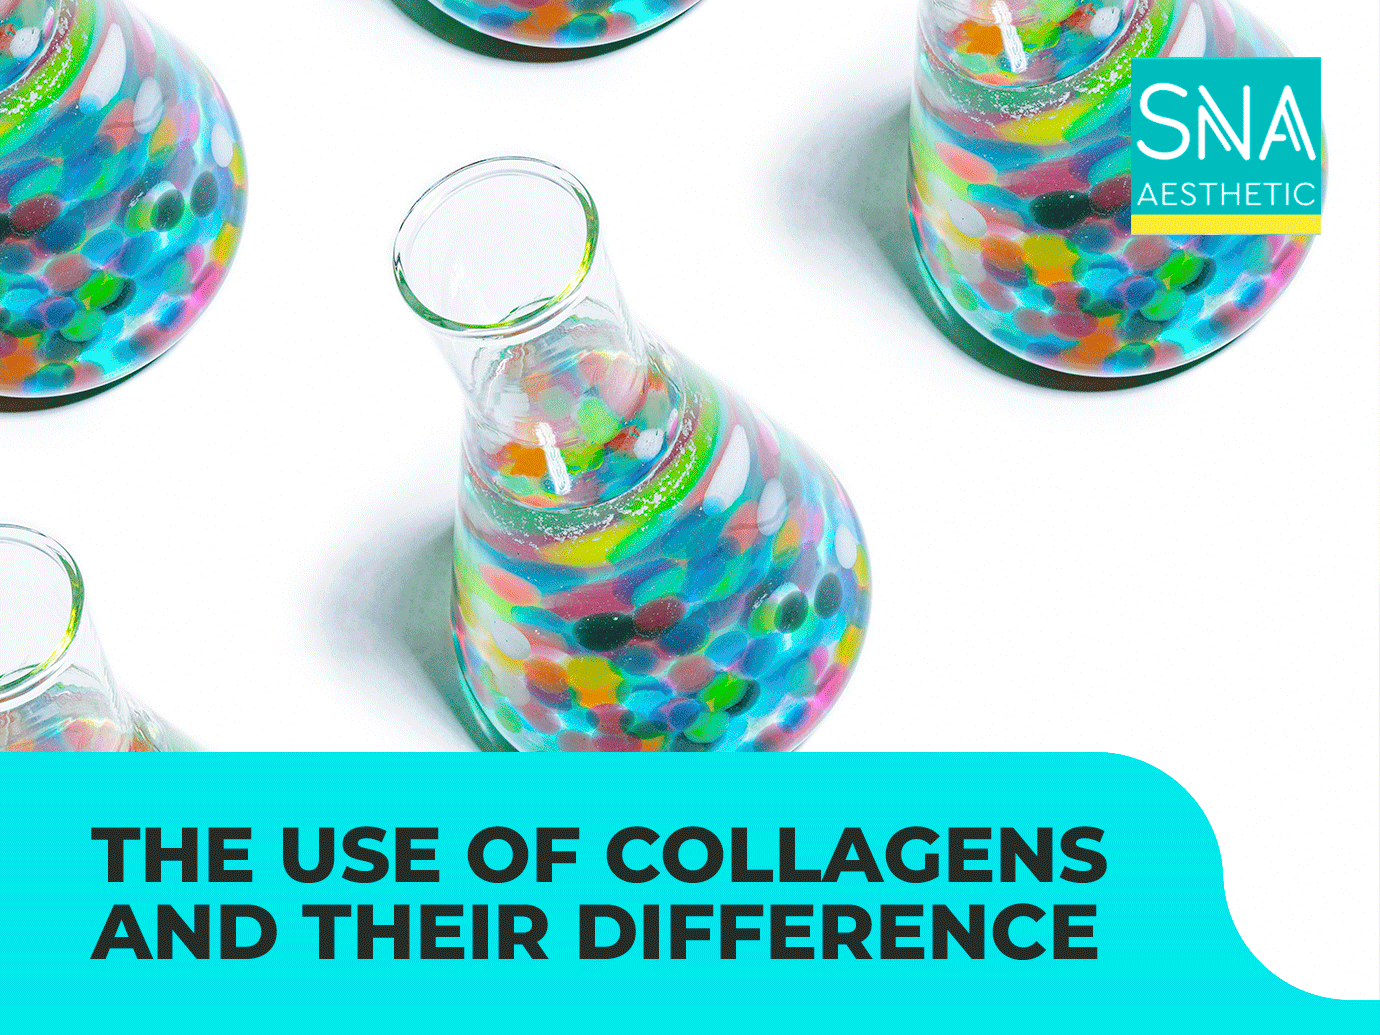 The use of collagens and their difference